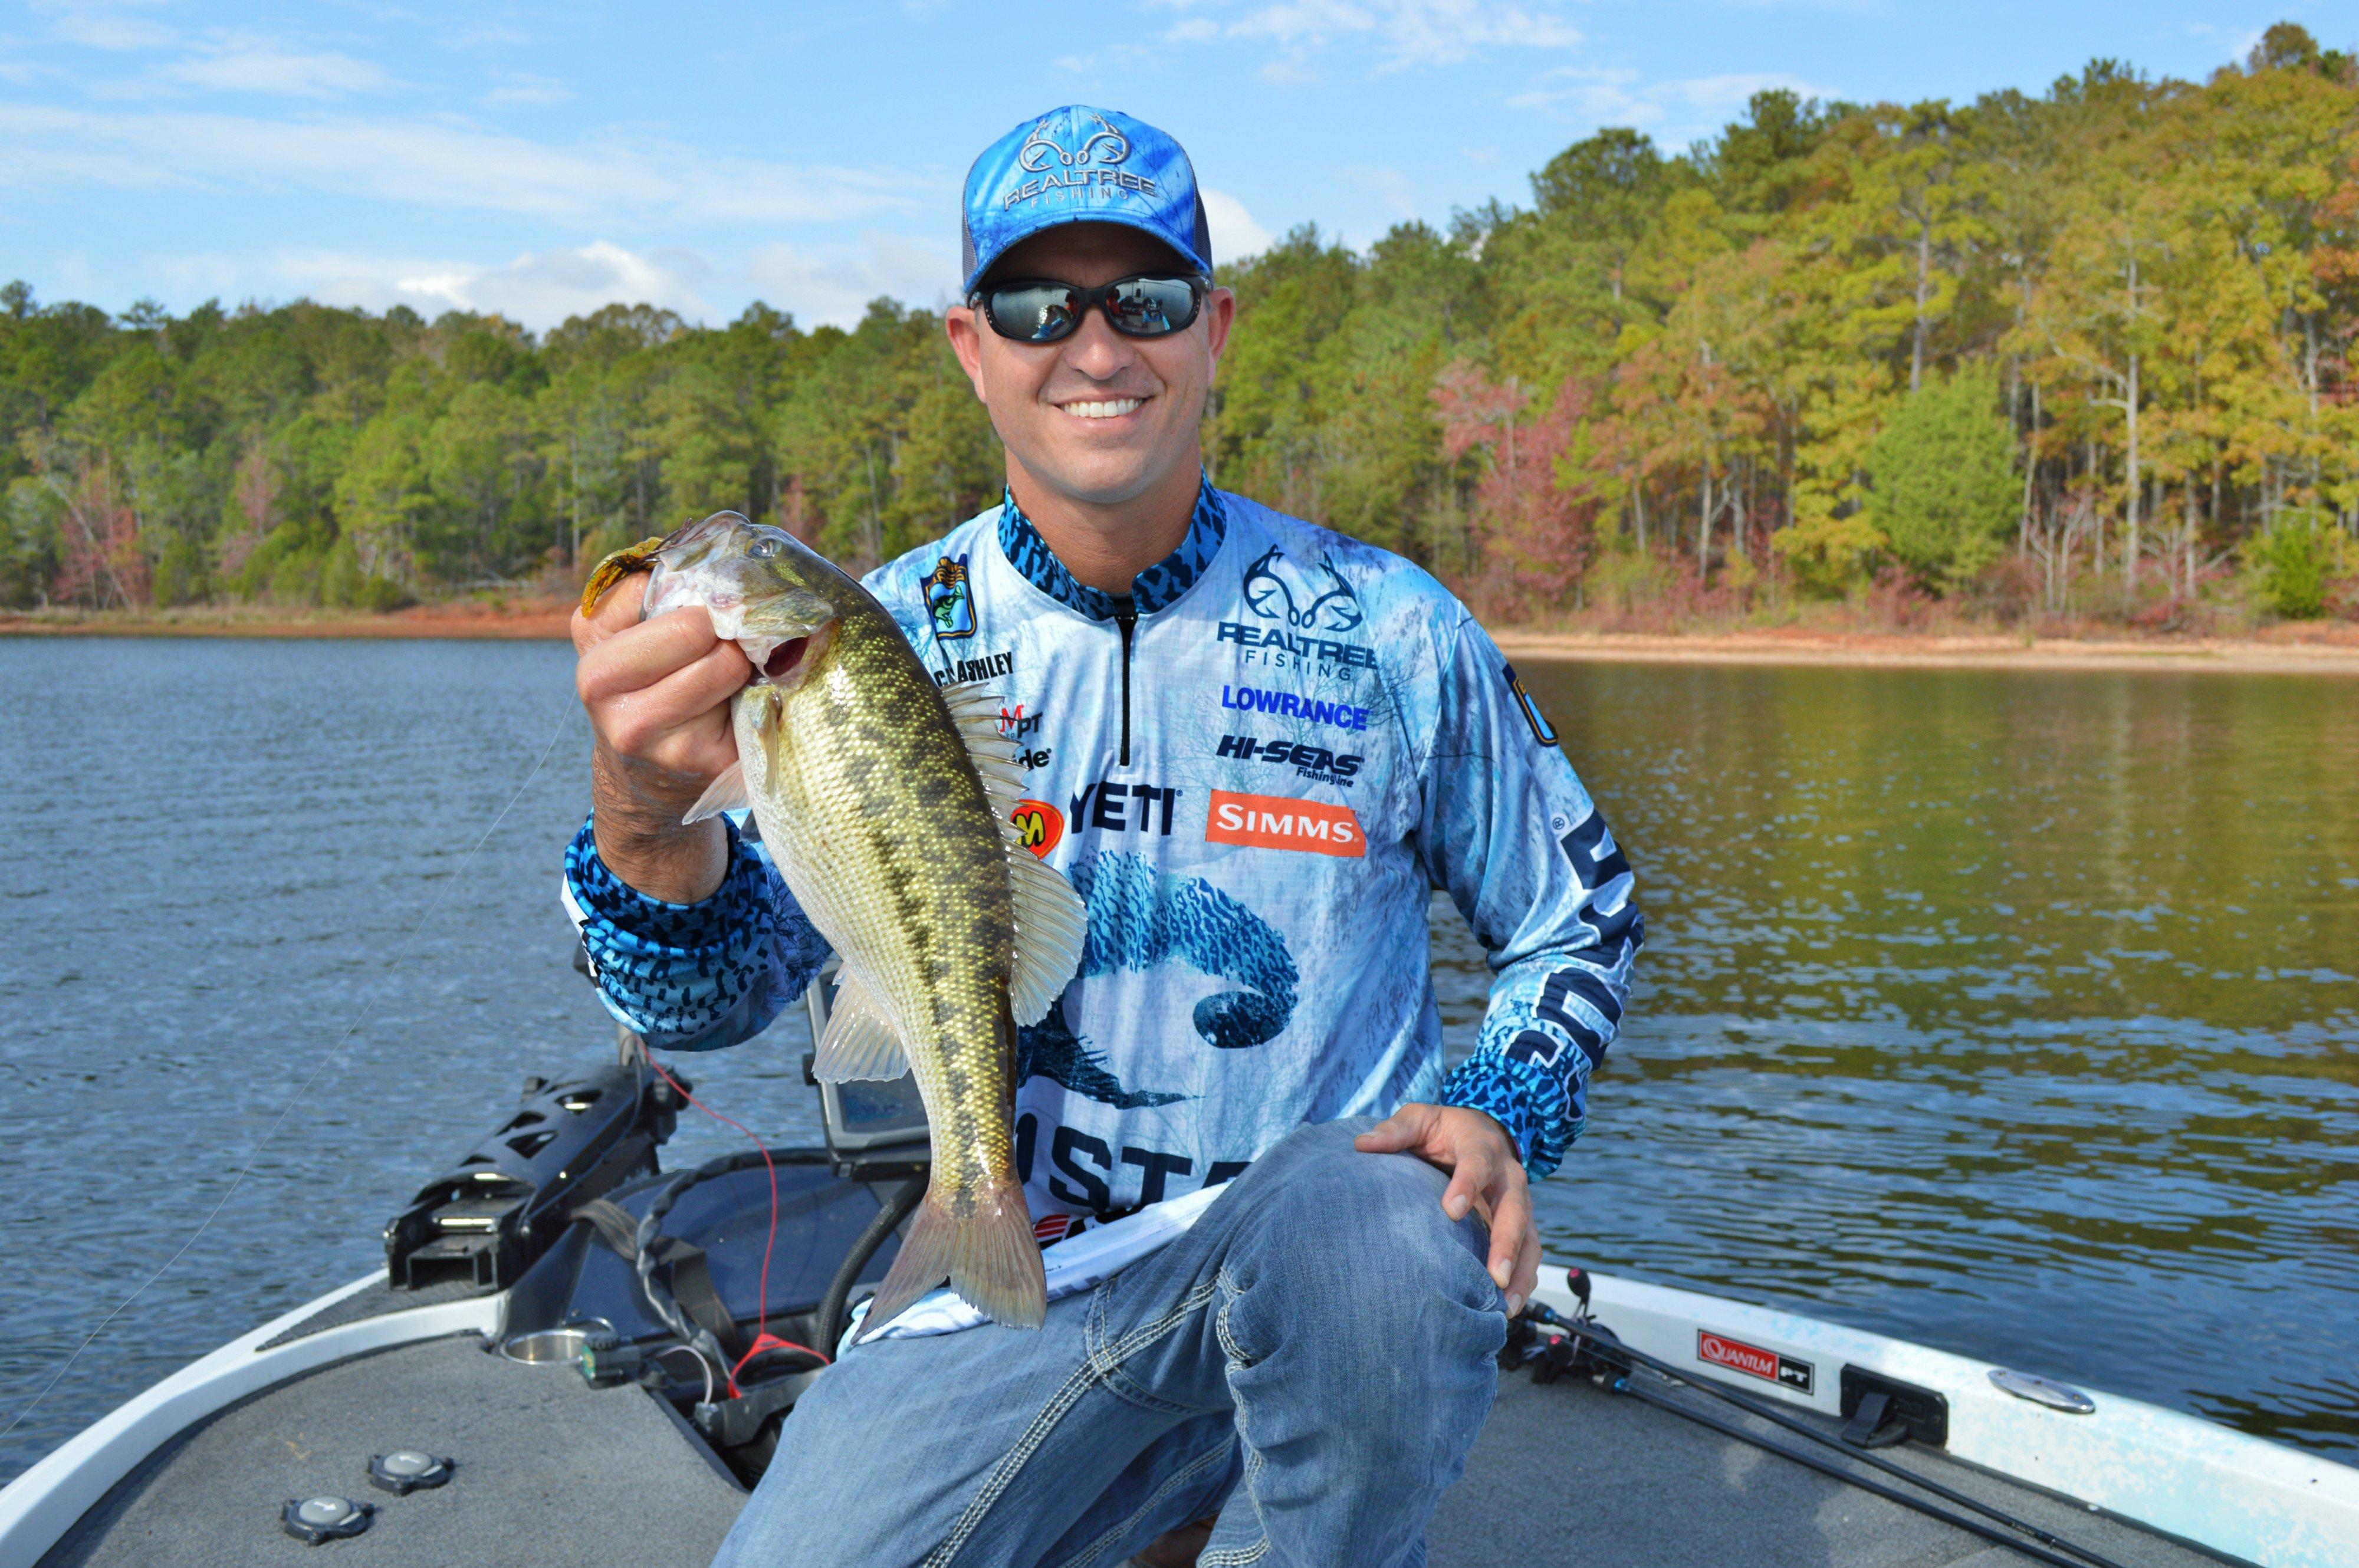 Do you know about this Realtree Fishing news?